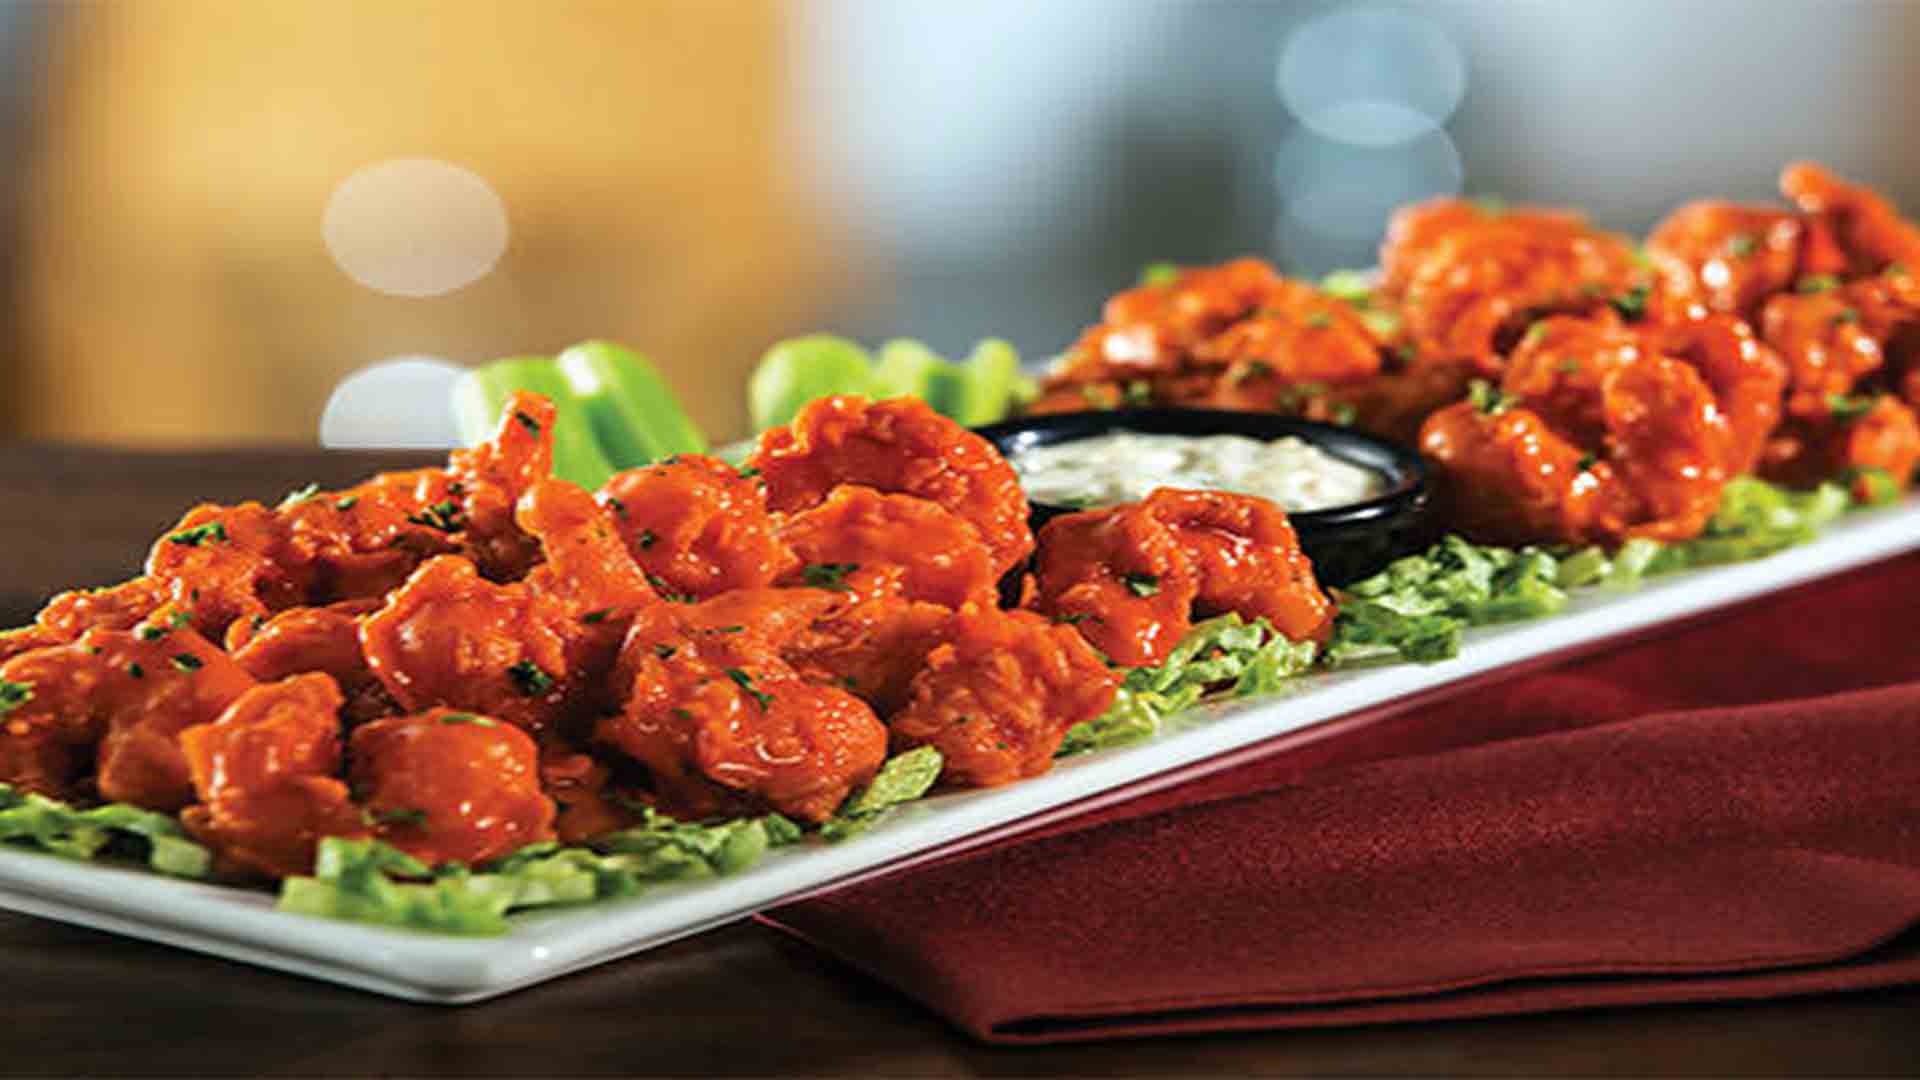 A platter of buffalo wings served with celery and dipping sauce.